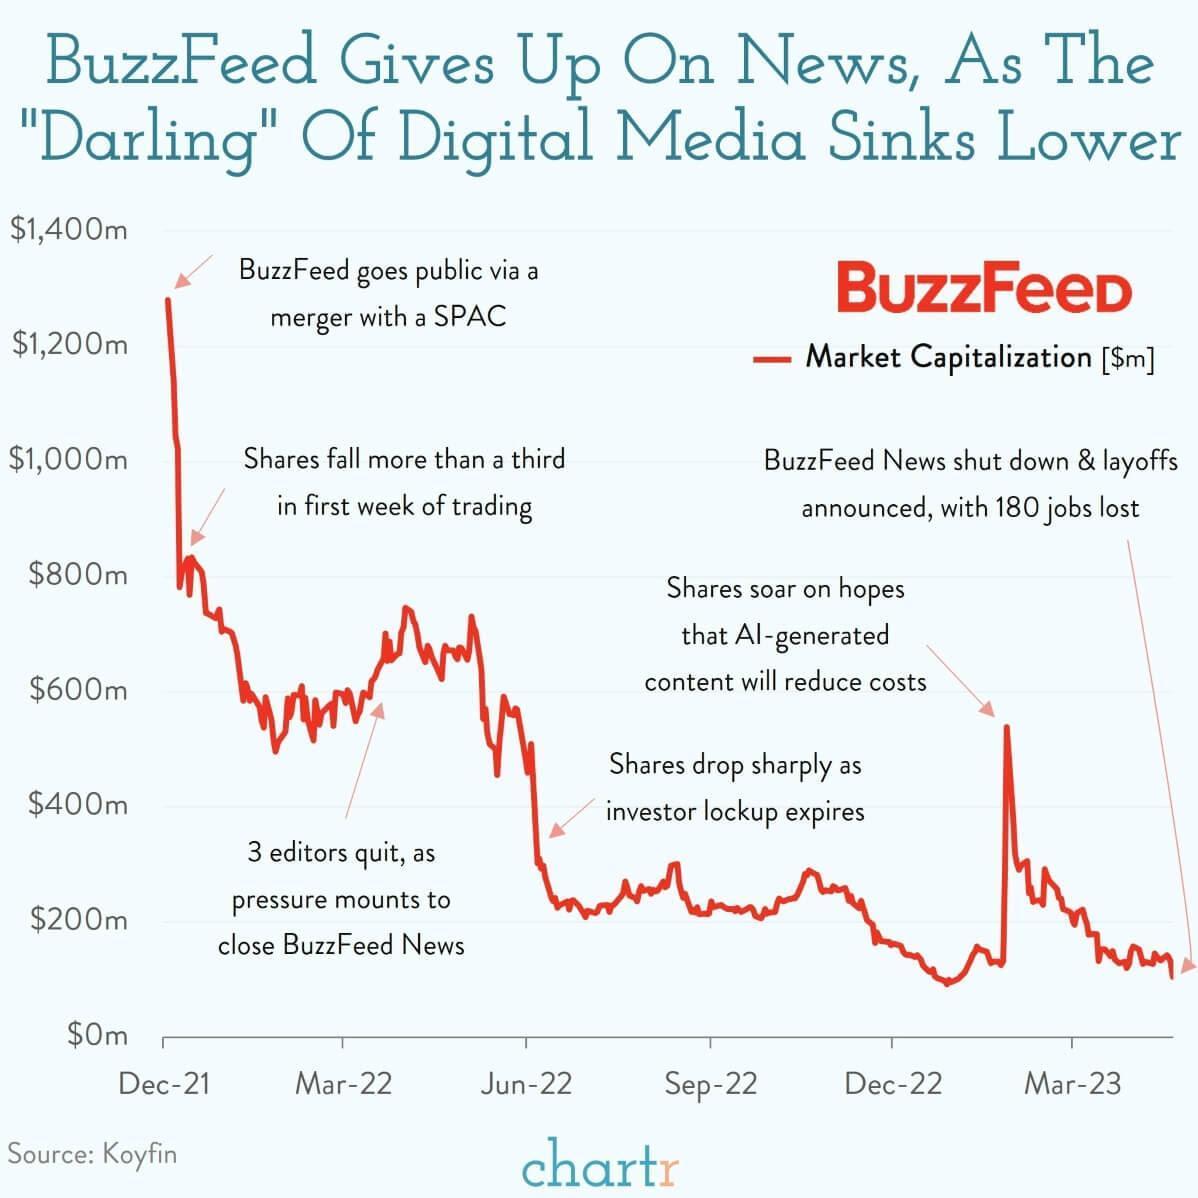 Chartr on Buzzfeed news closing